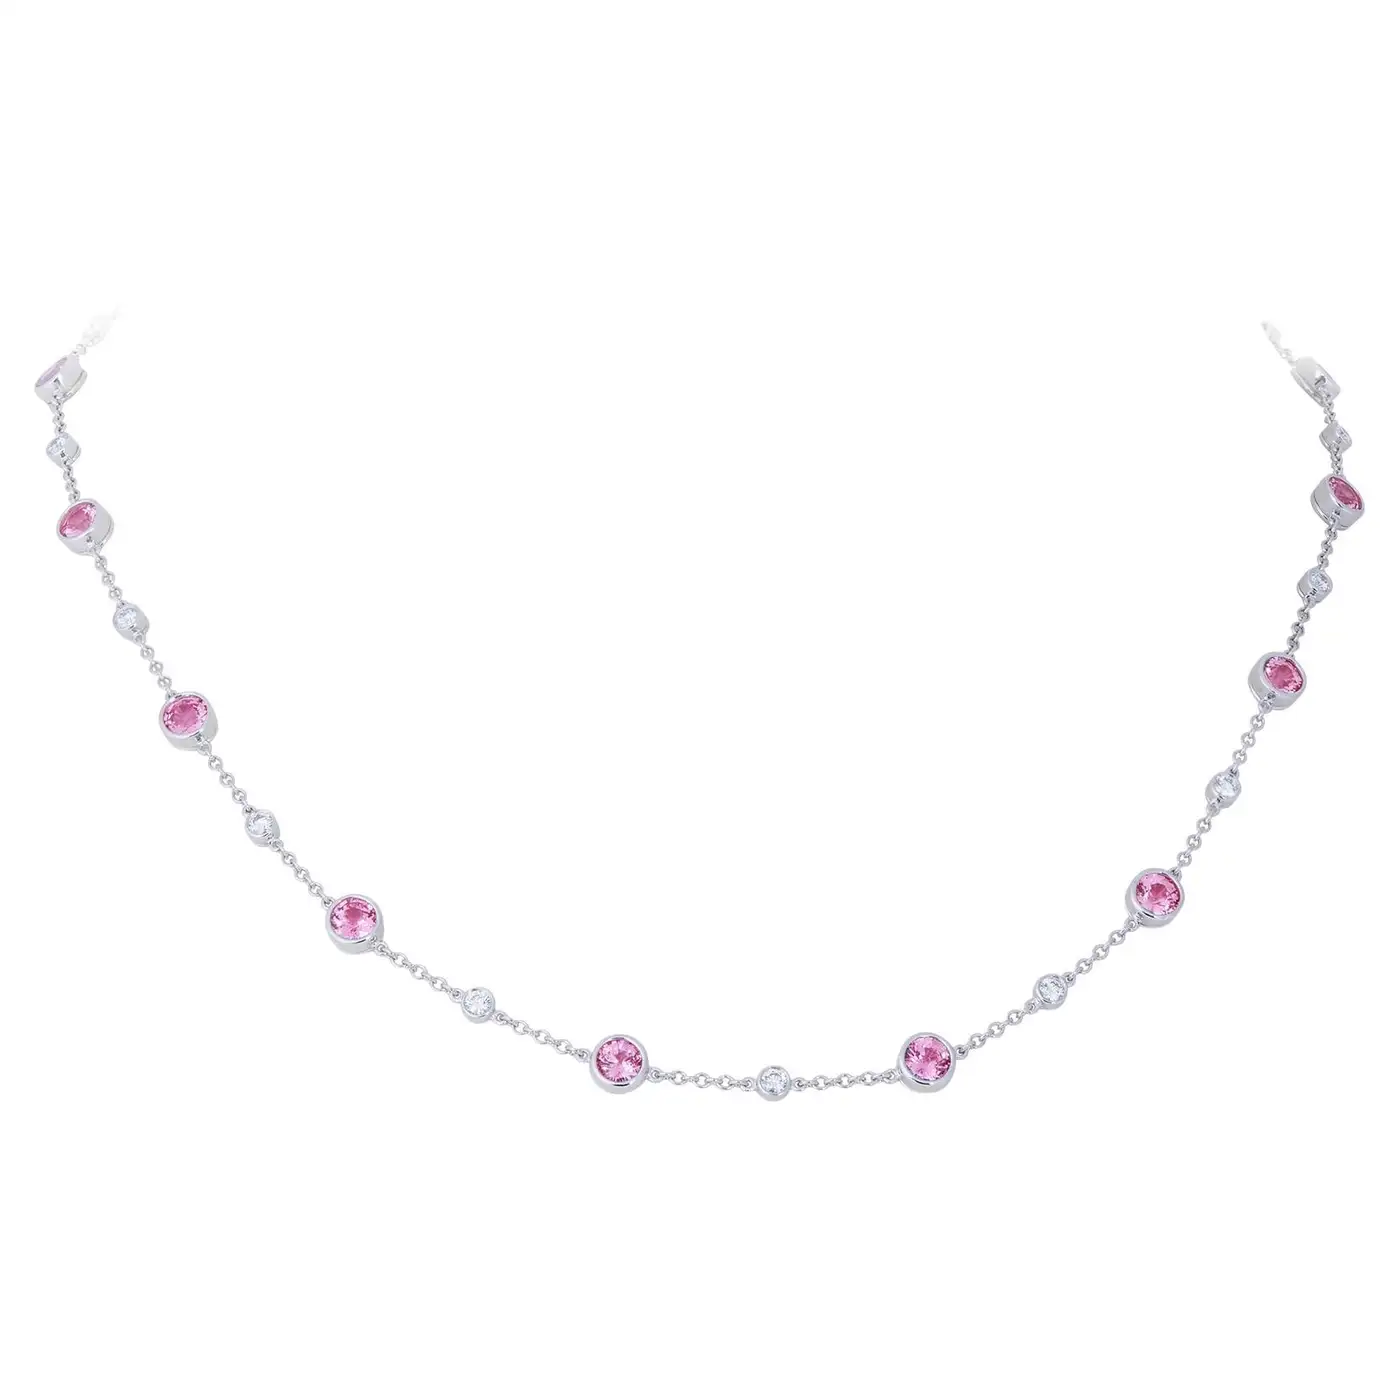 Tiffany-Swing-Pink-sapphire-and-Diamond-Necklace-Tiffany-Co-1.webp